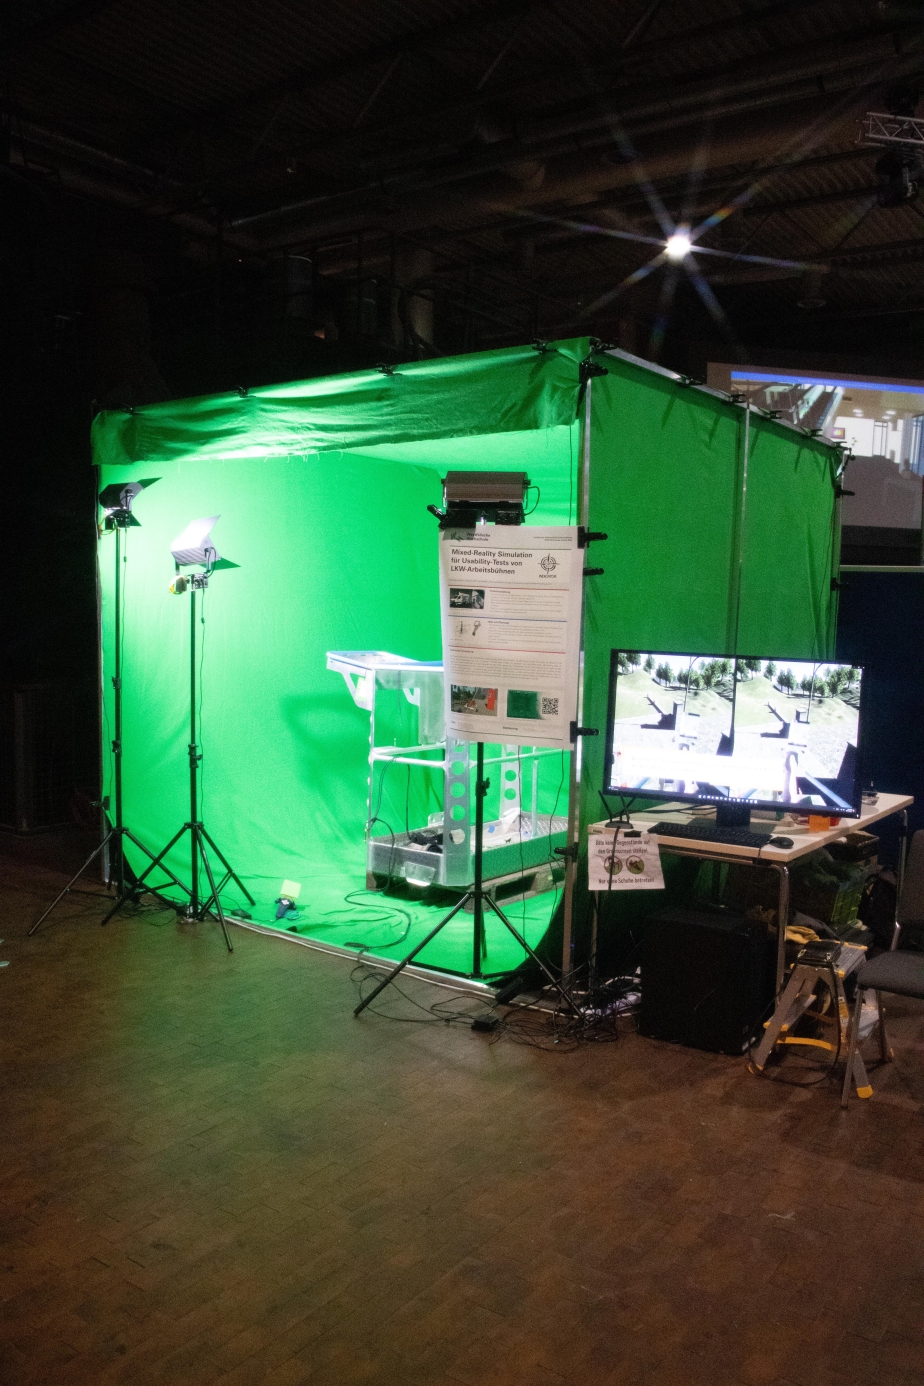 Interested visitors could try out the realistic simulation in a greenscreen cube at the DIVR XR Science Award exhibition.